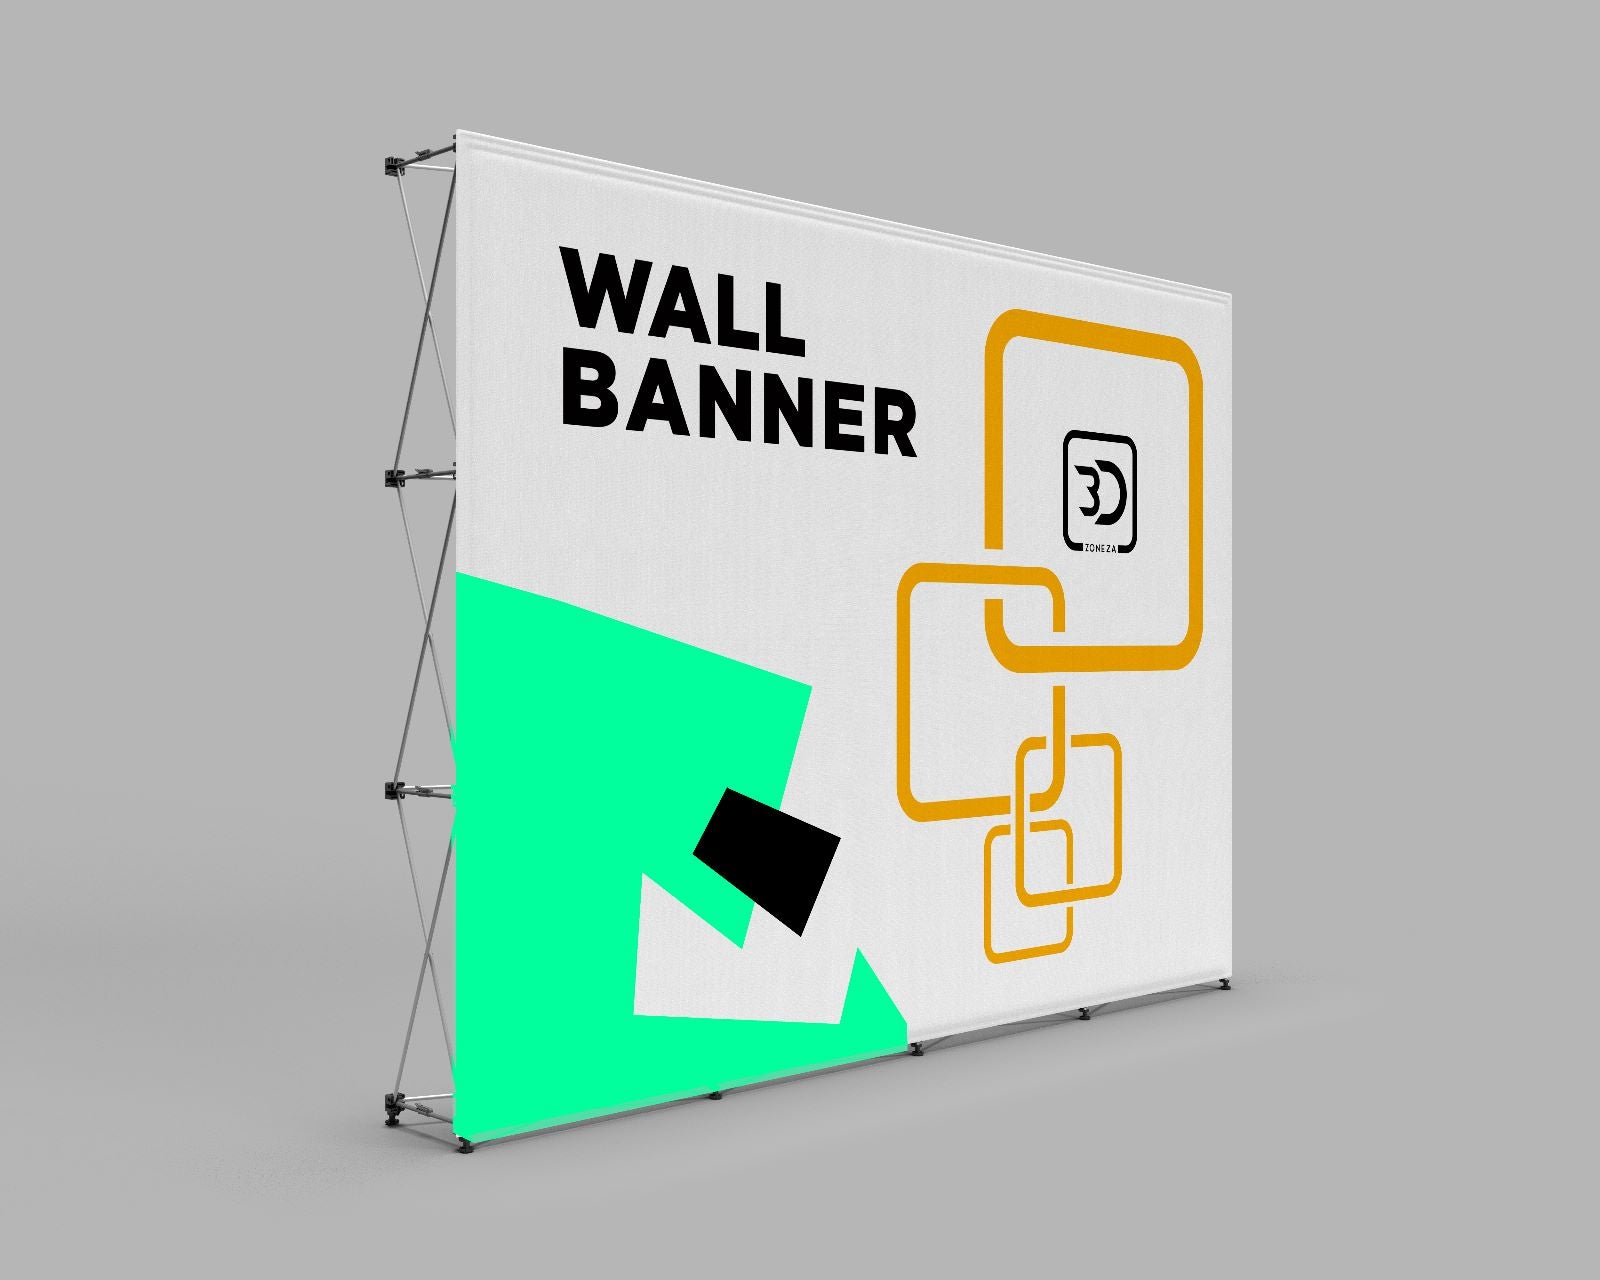 3x4 Pop-Up Wall Banner Display (89.5H X 118.5W in.)